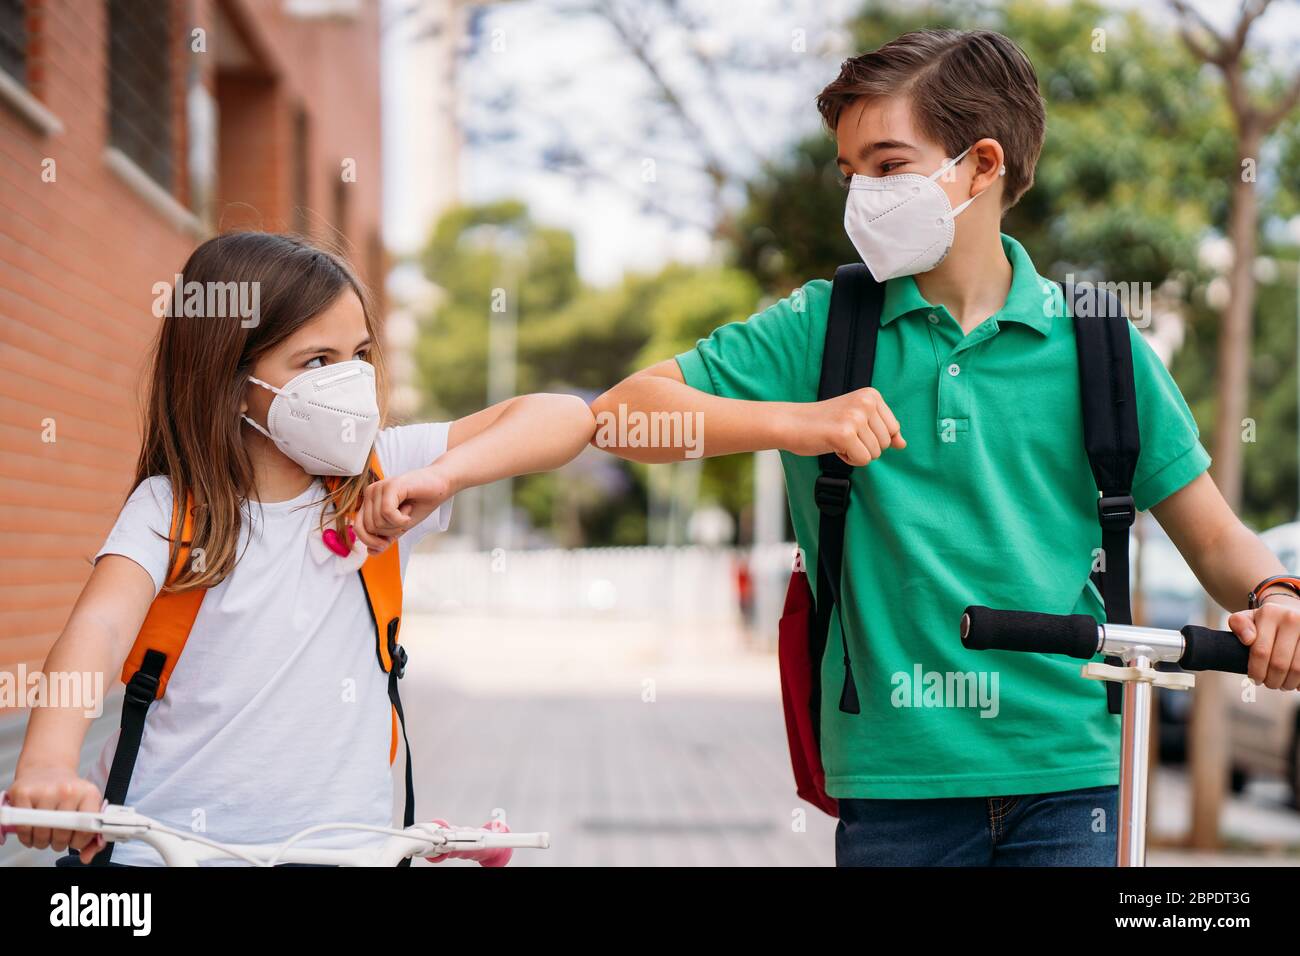 Boy and girl with mask greeting on the street during the coronavirus pandemic Stock Photo